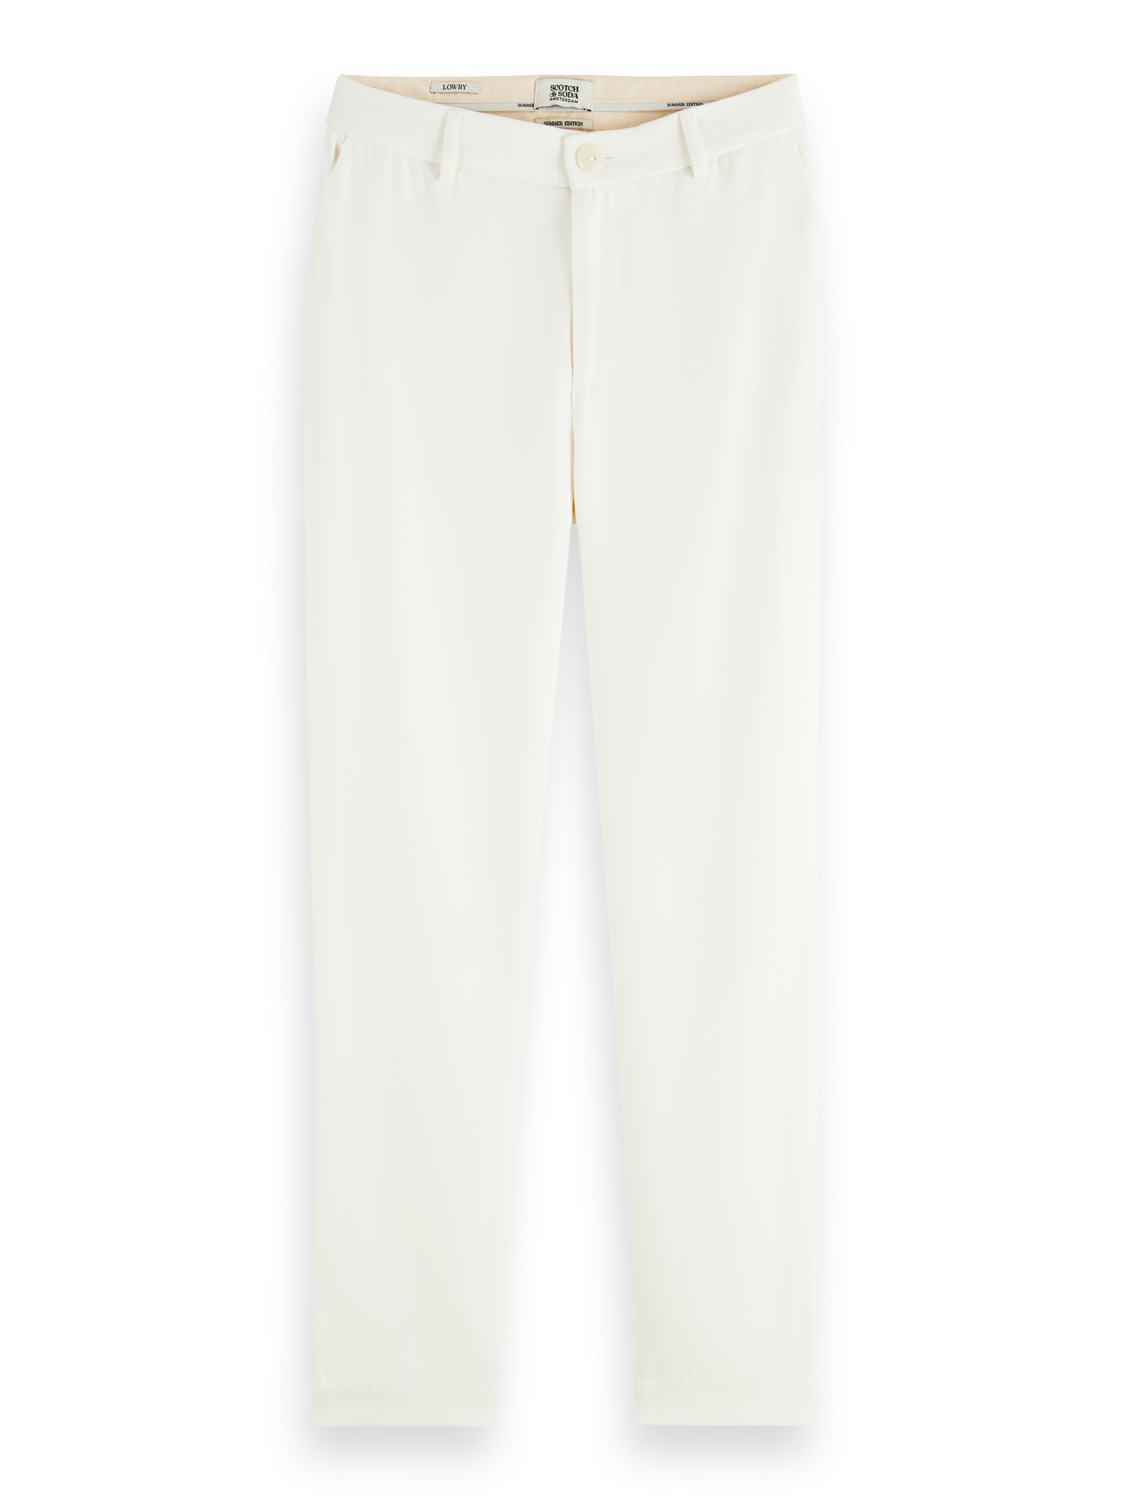 Scotch & Soda Lowry tailored slim fit structured creams pants - Brave